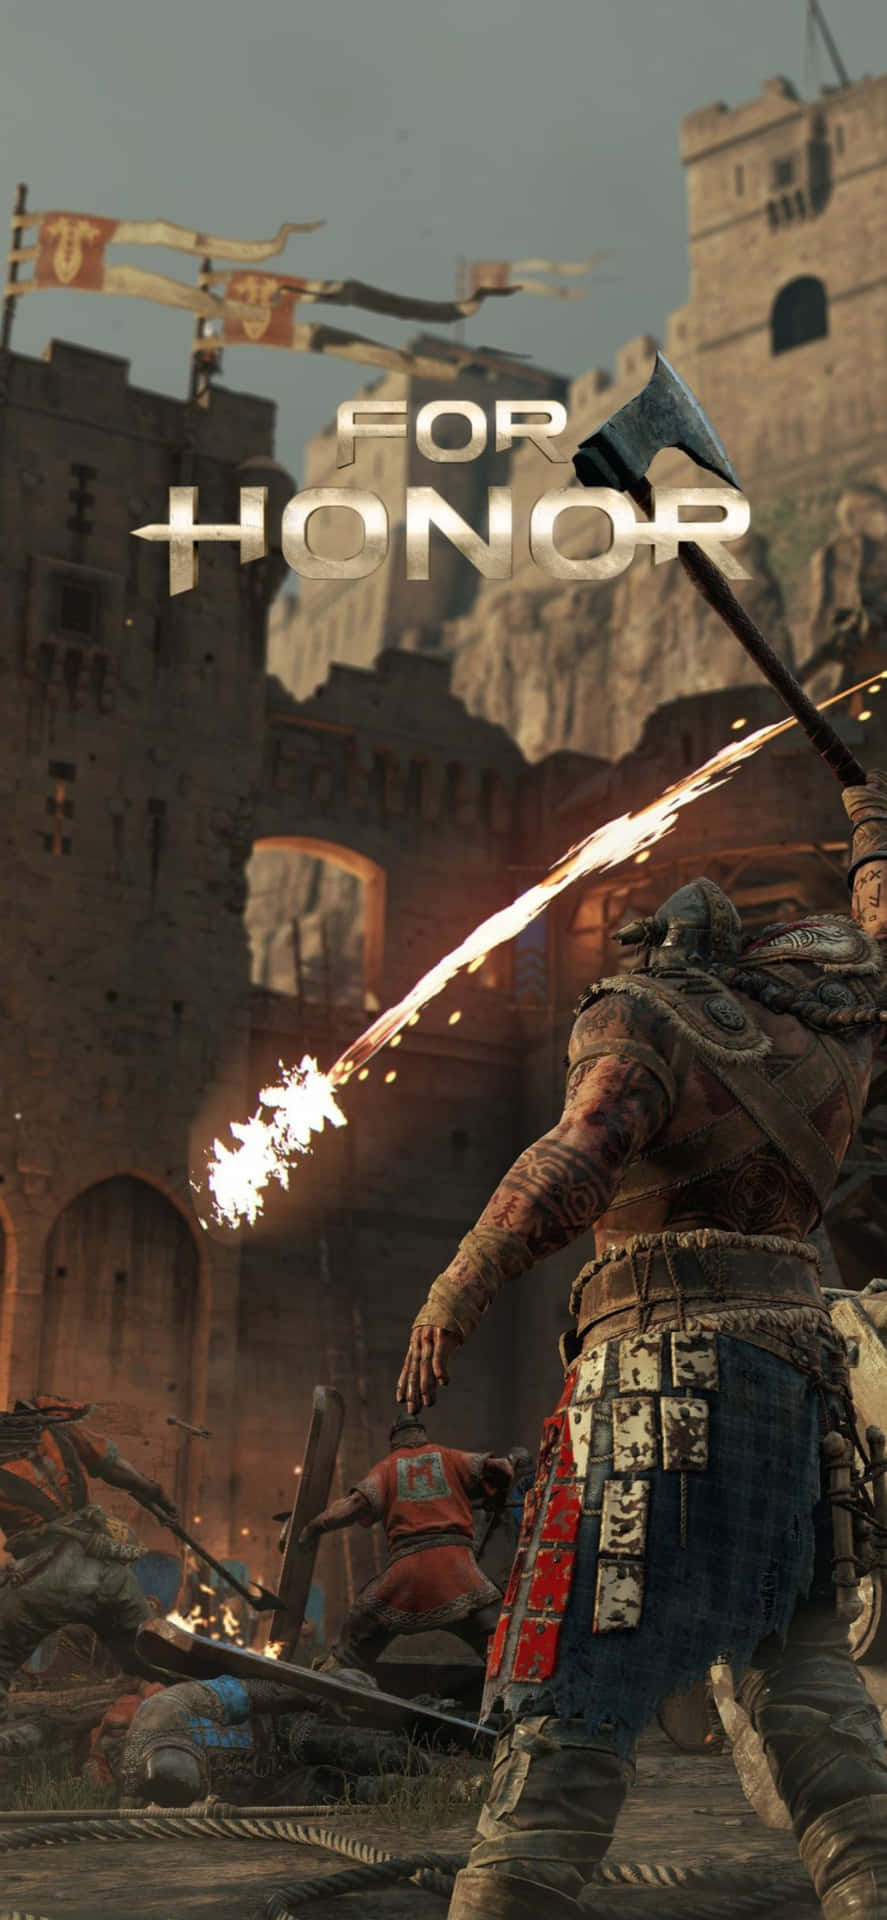 Celebrate your heroism with the new iPhone Xs For Honor!